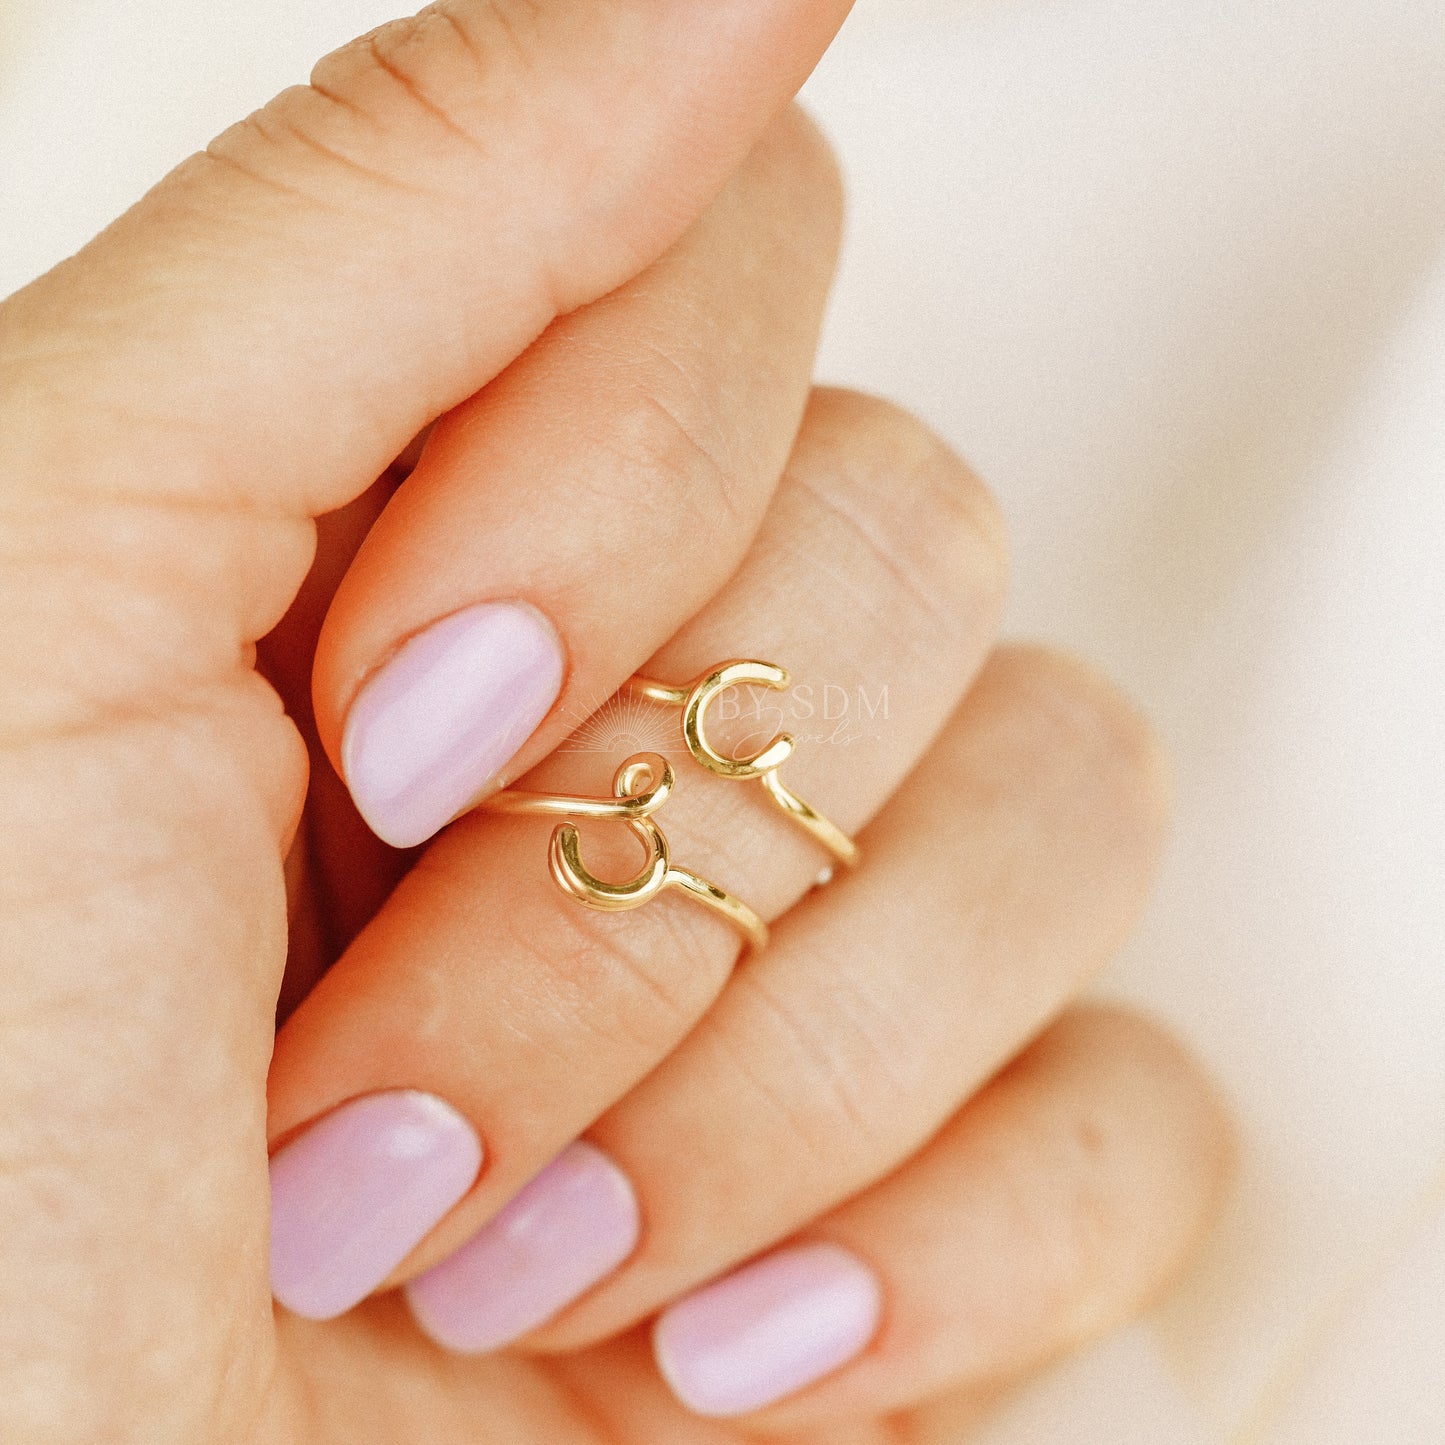 Dainty Initial S Ring • Gold Letter Ring • Personalized Initial Ring • Initial Name Ring • Adjustable Initial Ring • BYSDMJEWELS